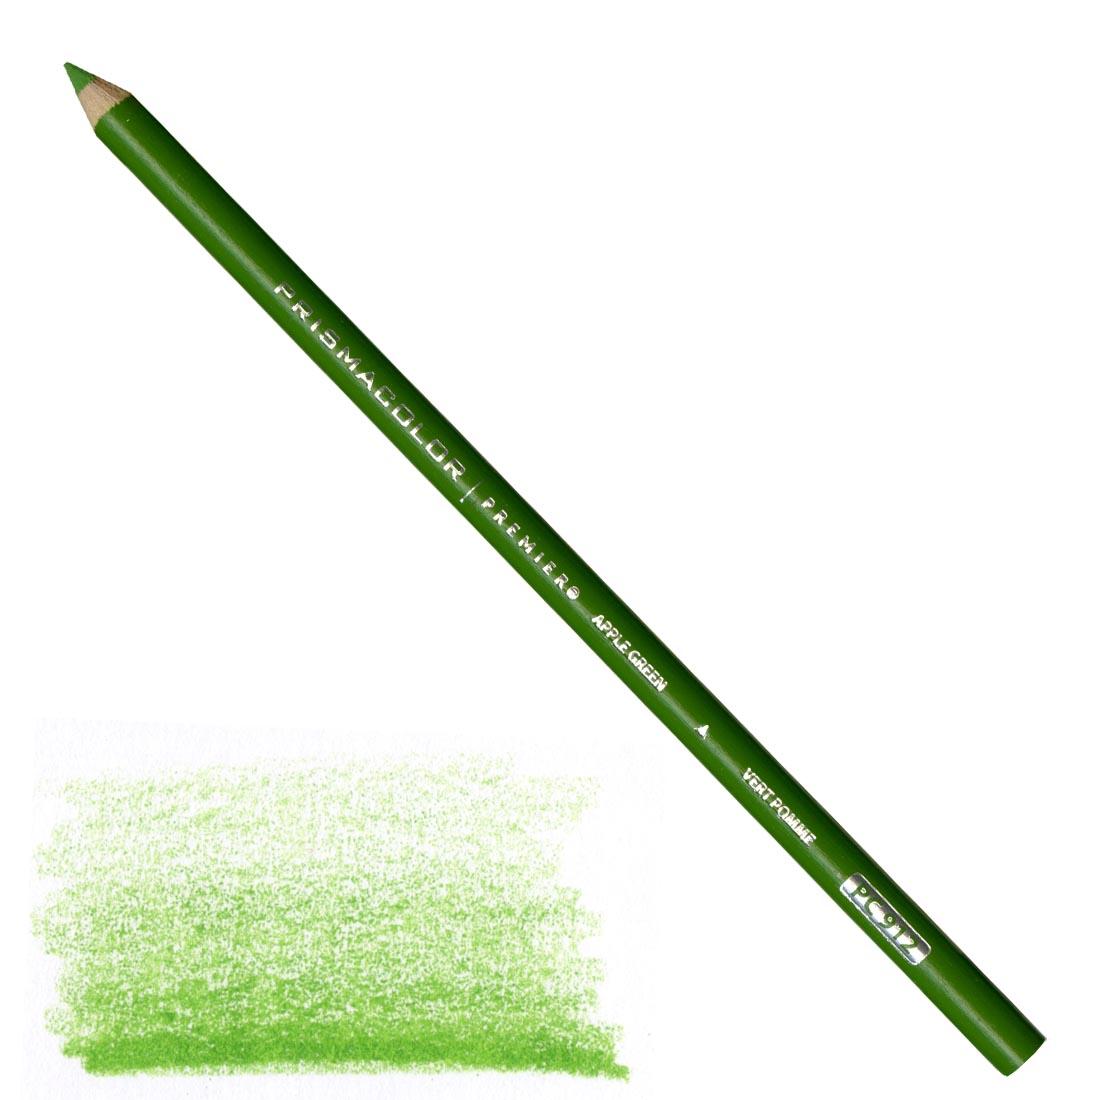 Apple Green Prismacolor Premier Colored Pencil with a sample colored swatch